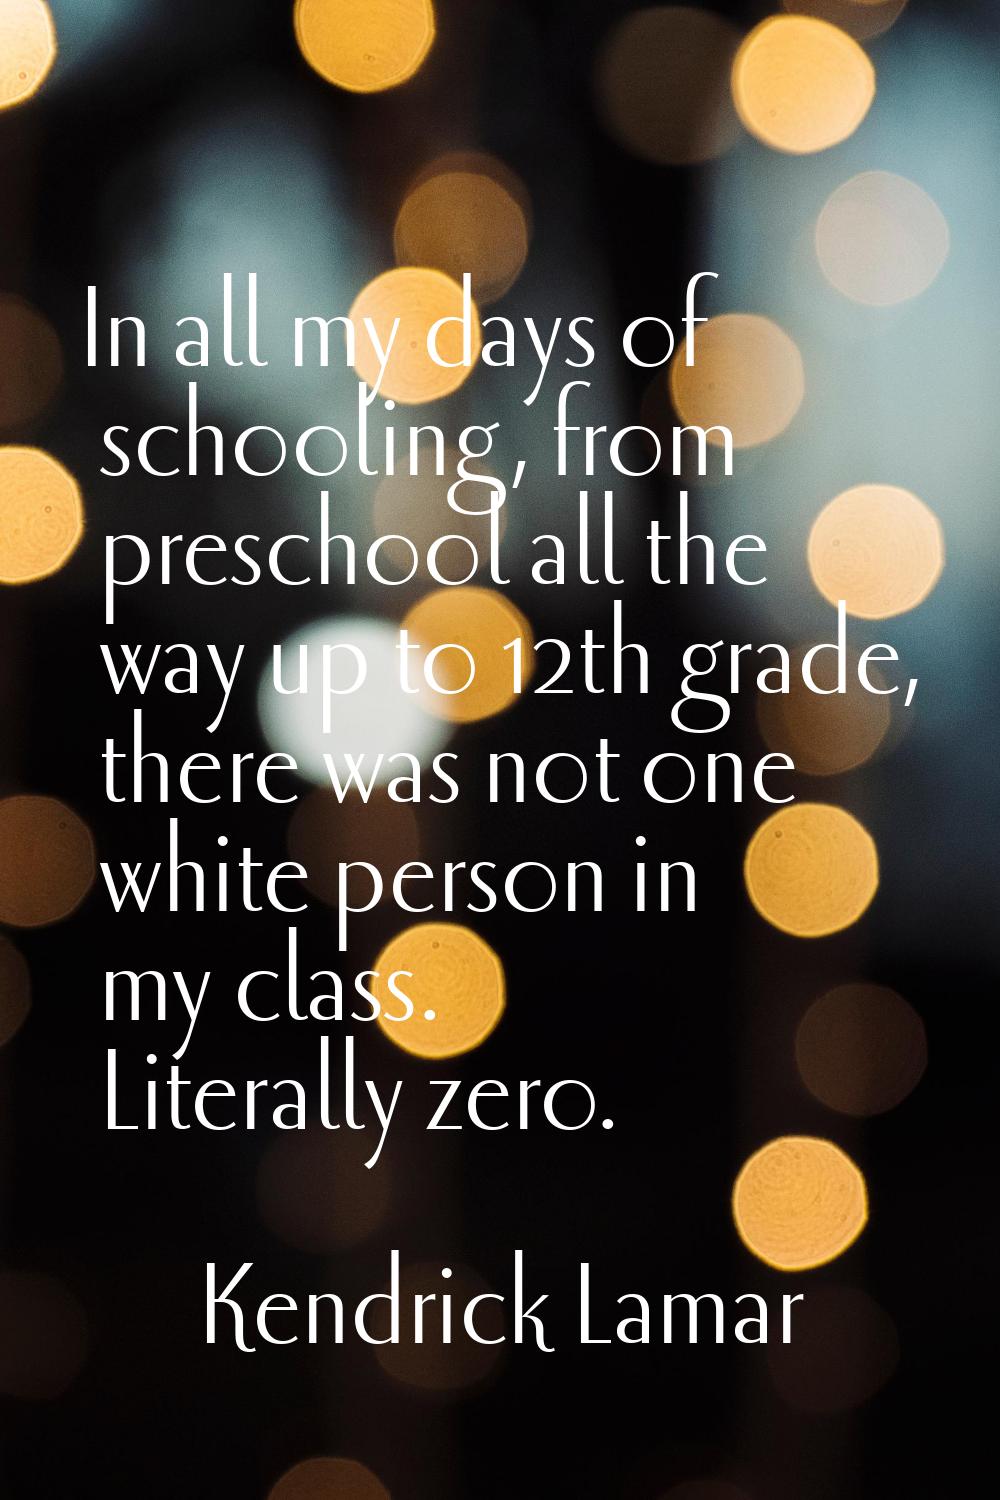 In all my days of schooling, from preschool all the way up to 12th grade, there was not one white p